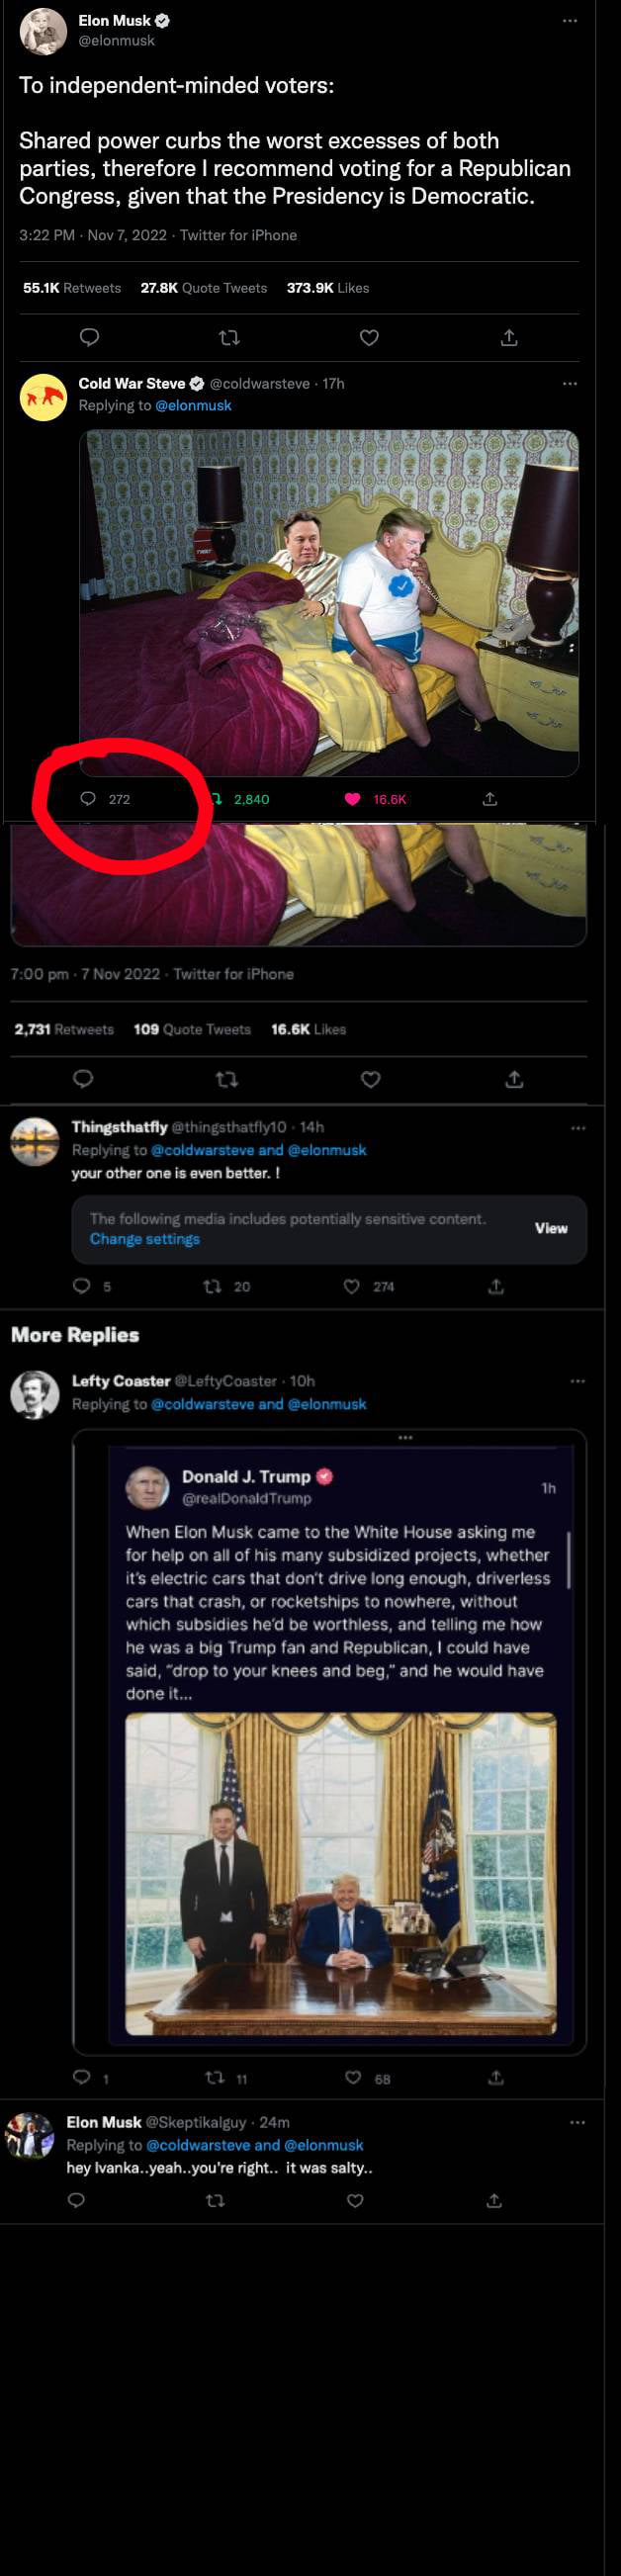 Musk hiding Tweets that offend him. 240 replies, only shows 3